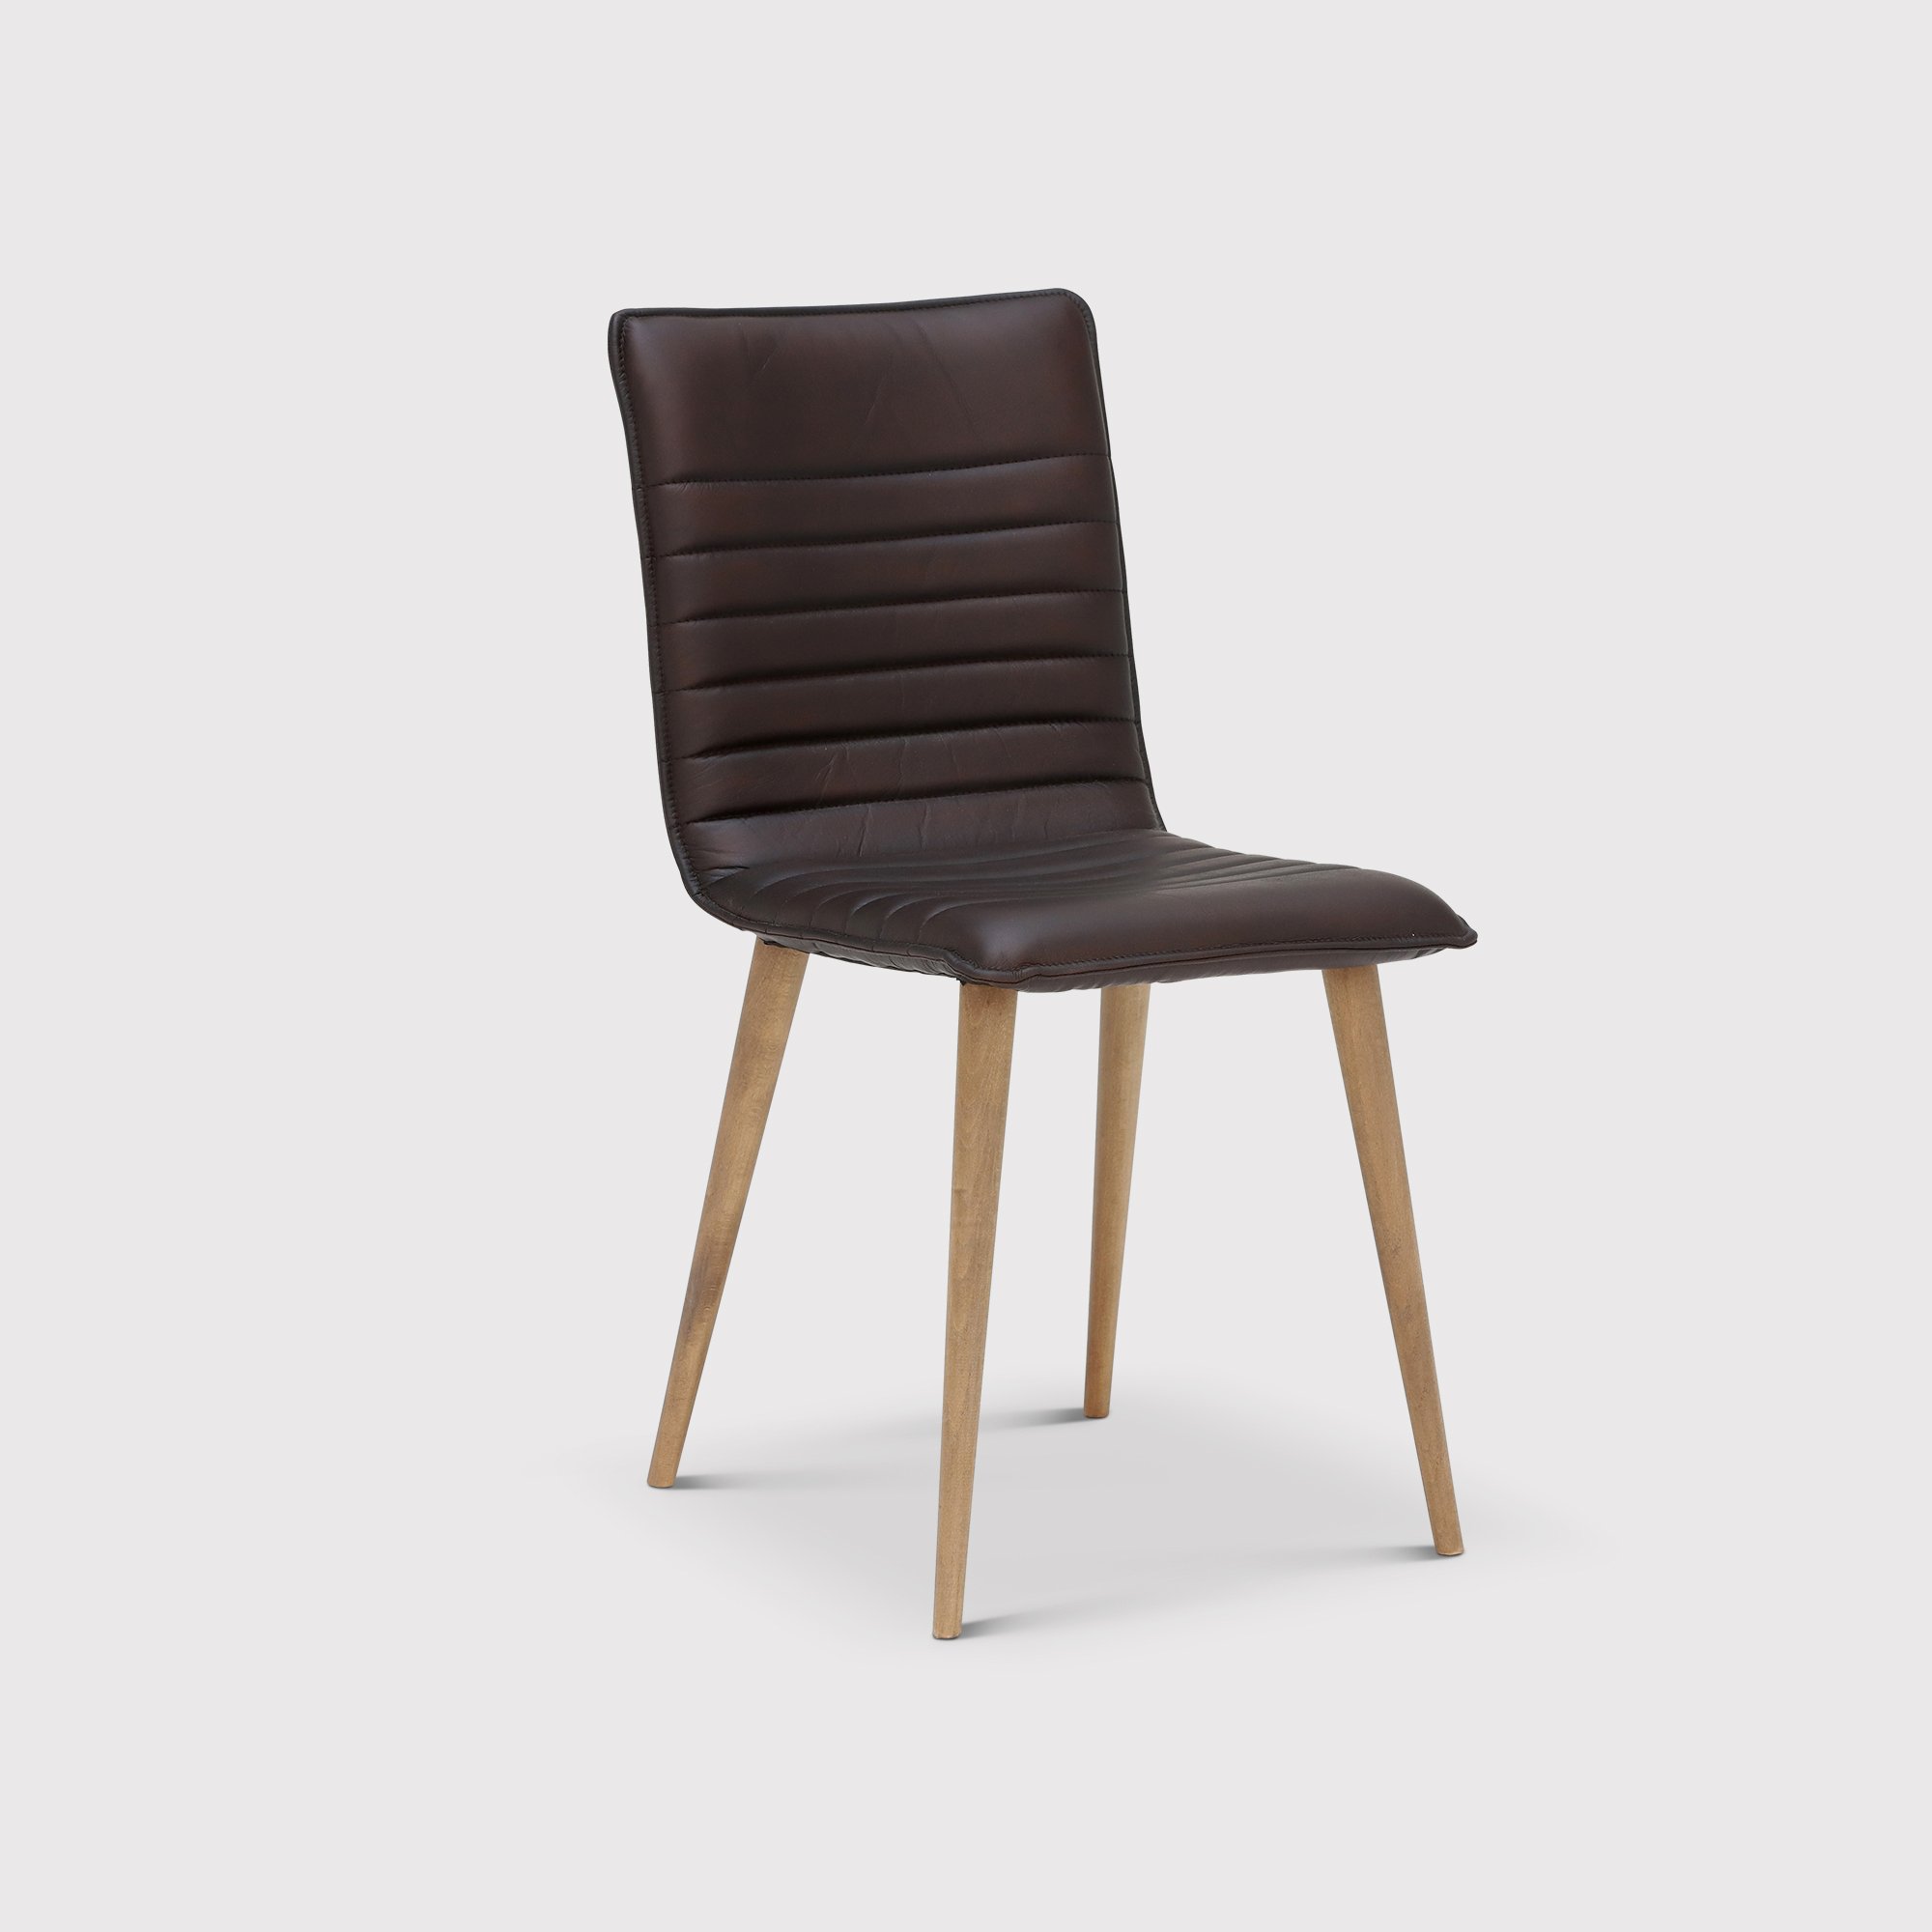 Pure Furniture Bram Dining Chair With Wooden Legs, Brown Leather | Barker & Stonehouse